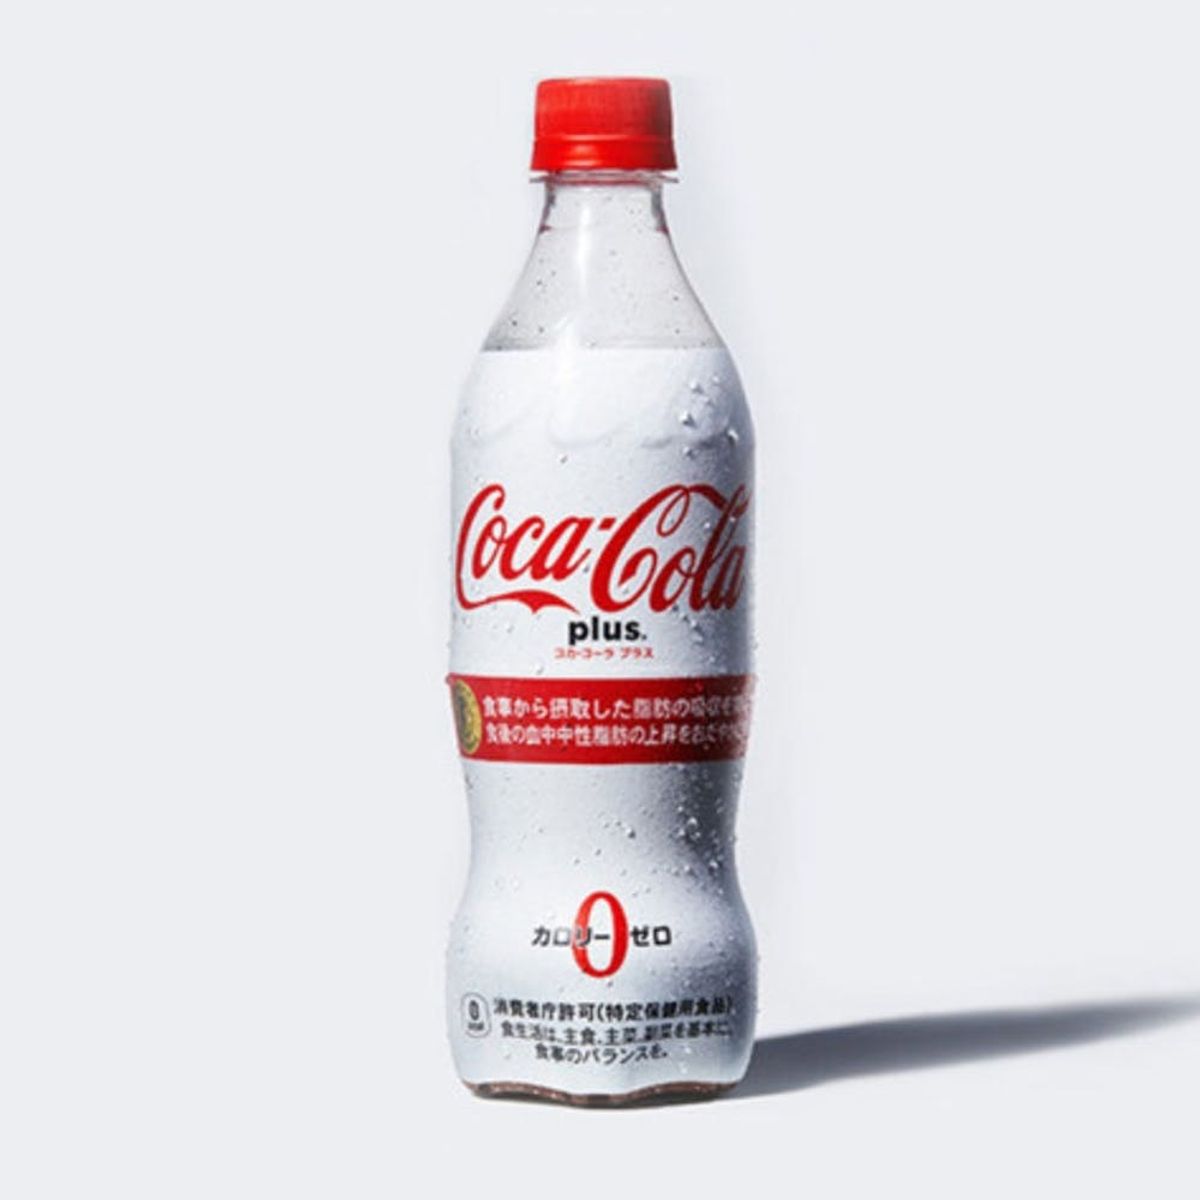 Coca-Cola’s New Drink Takes a Healthy Twist With Added Fiber